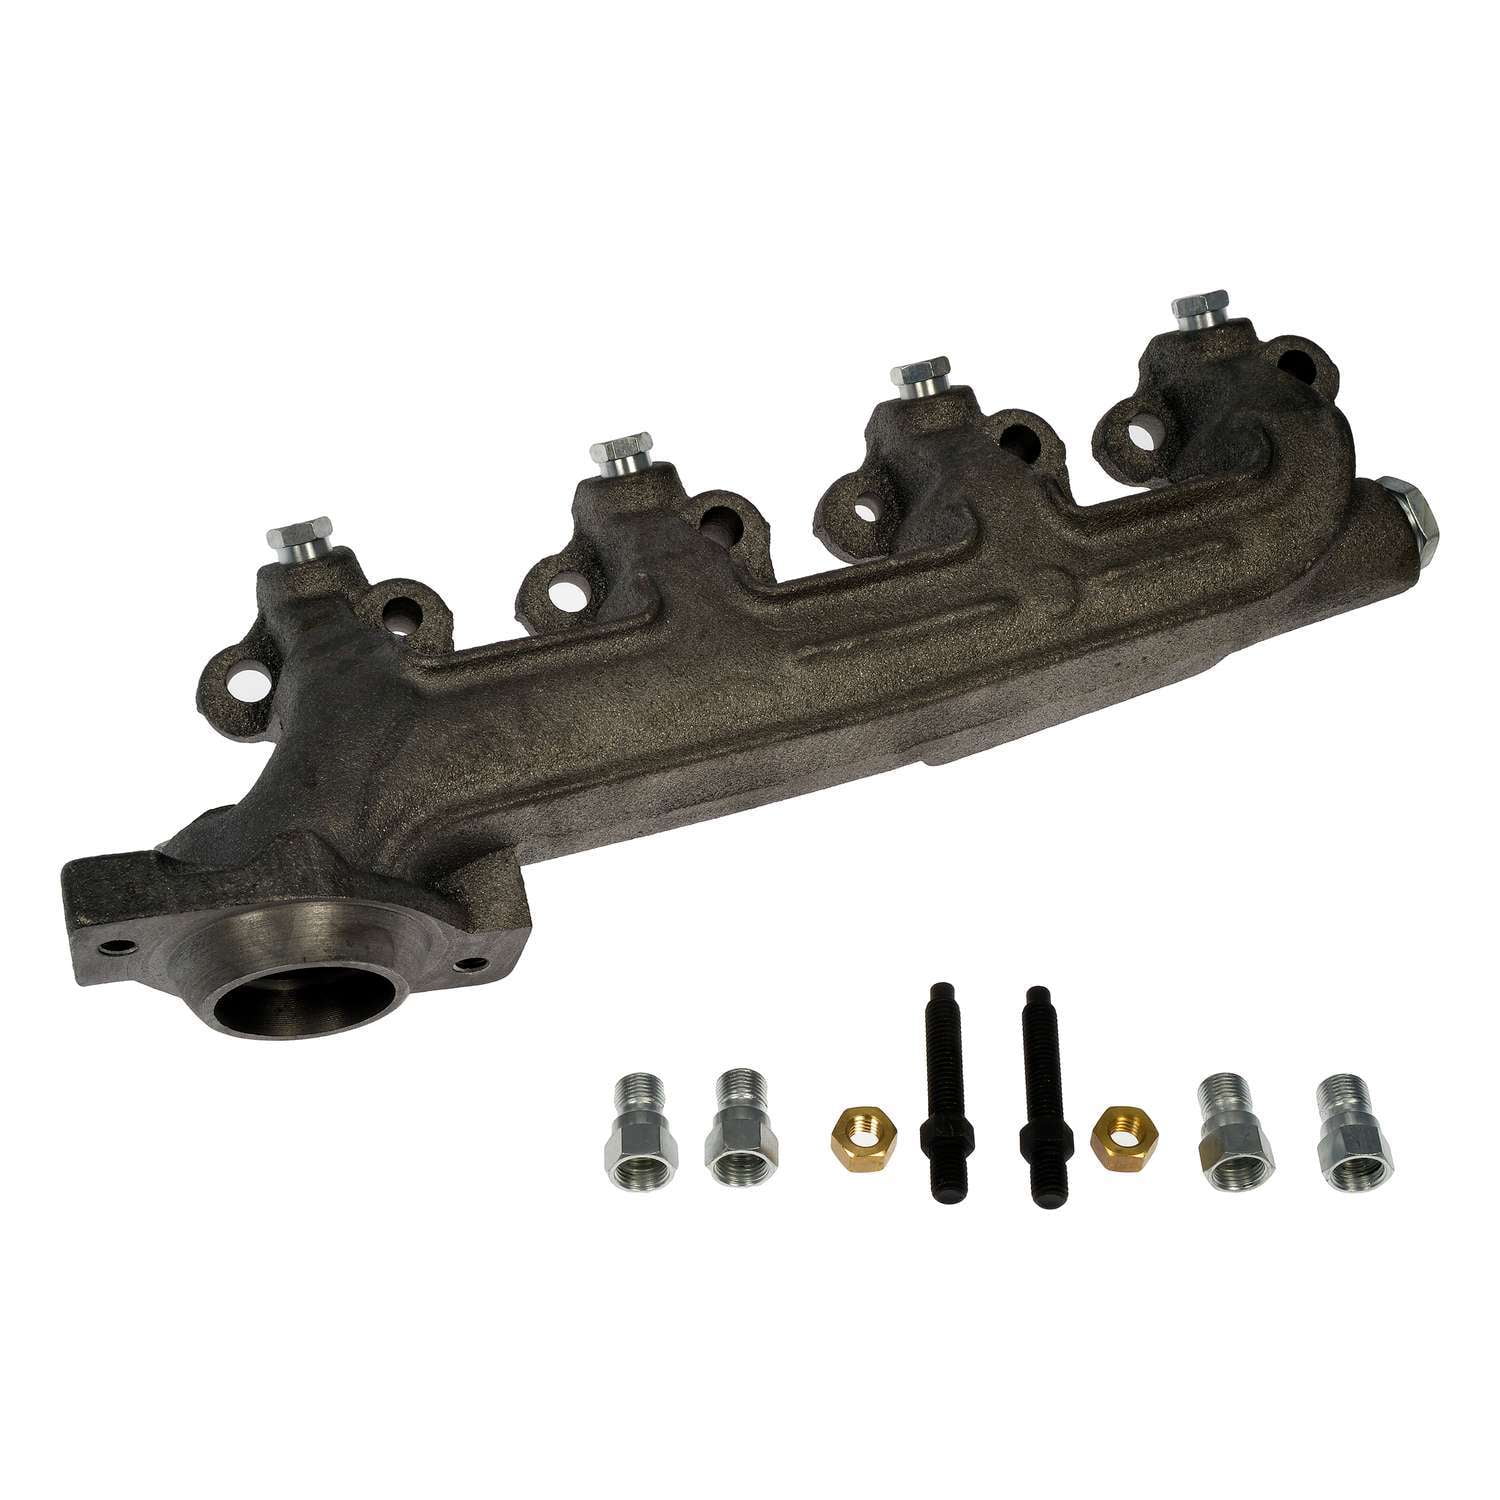 Dorman 674-165 Passenger Side Exhaust Manifold Kit Includes Required  Gaskets and Hardware Compatible with Select Ford Models Fits select:  1988-1996 FORD F150, 1988-1997 FORD F250